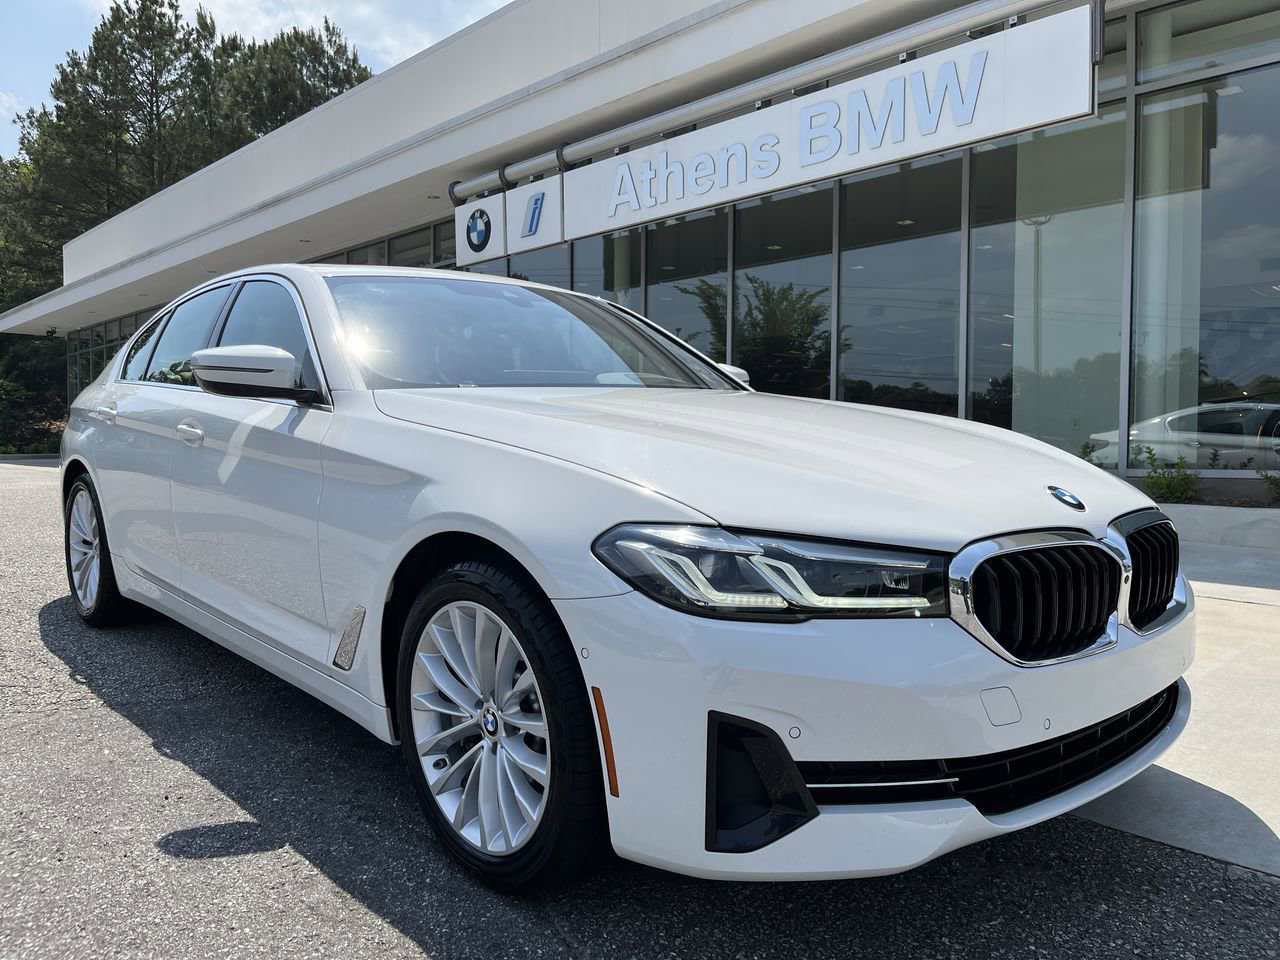 Pre-Owned 2021 BMW 5 Series 530i 4dr Car in Athens #MCF44716 | Athens BMW